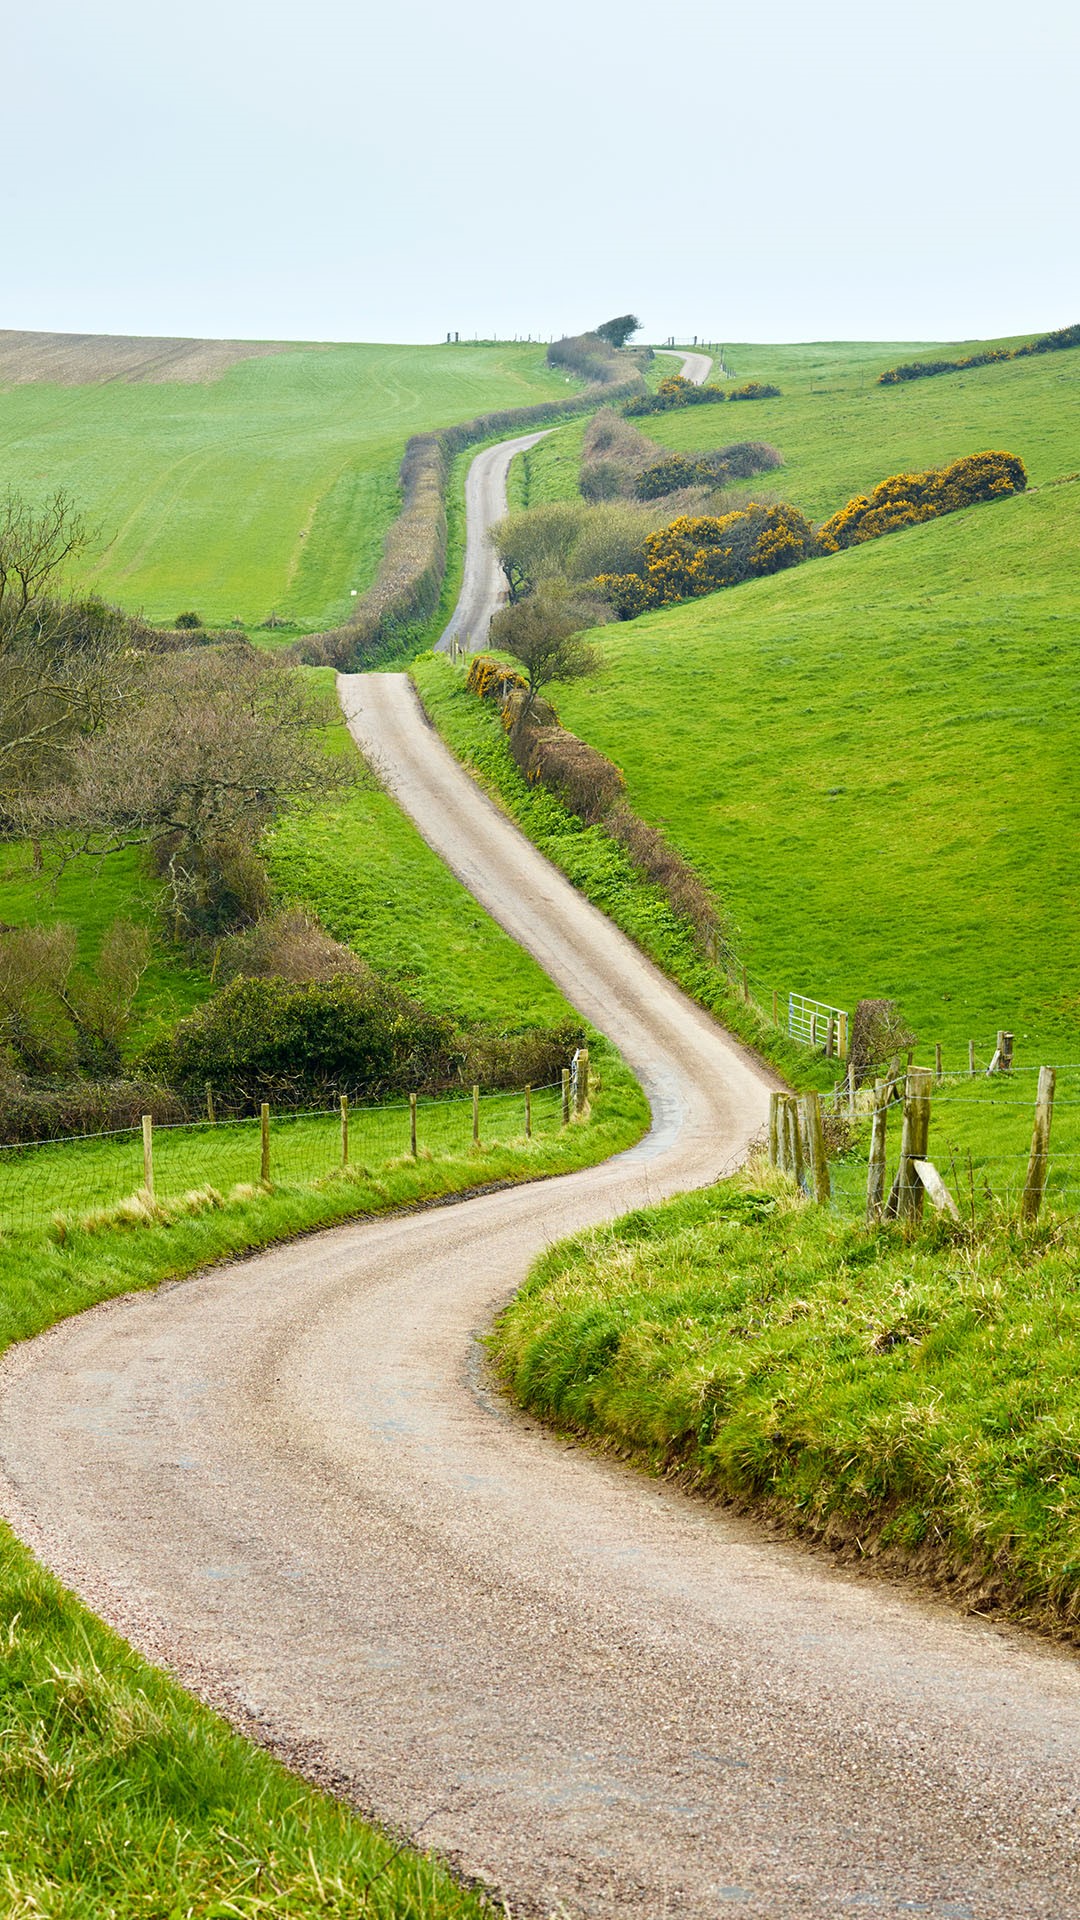 Country road, dirt track trough rural landscape, England, UK